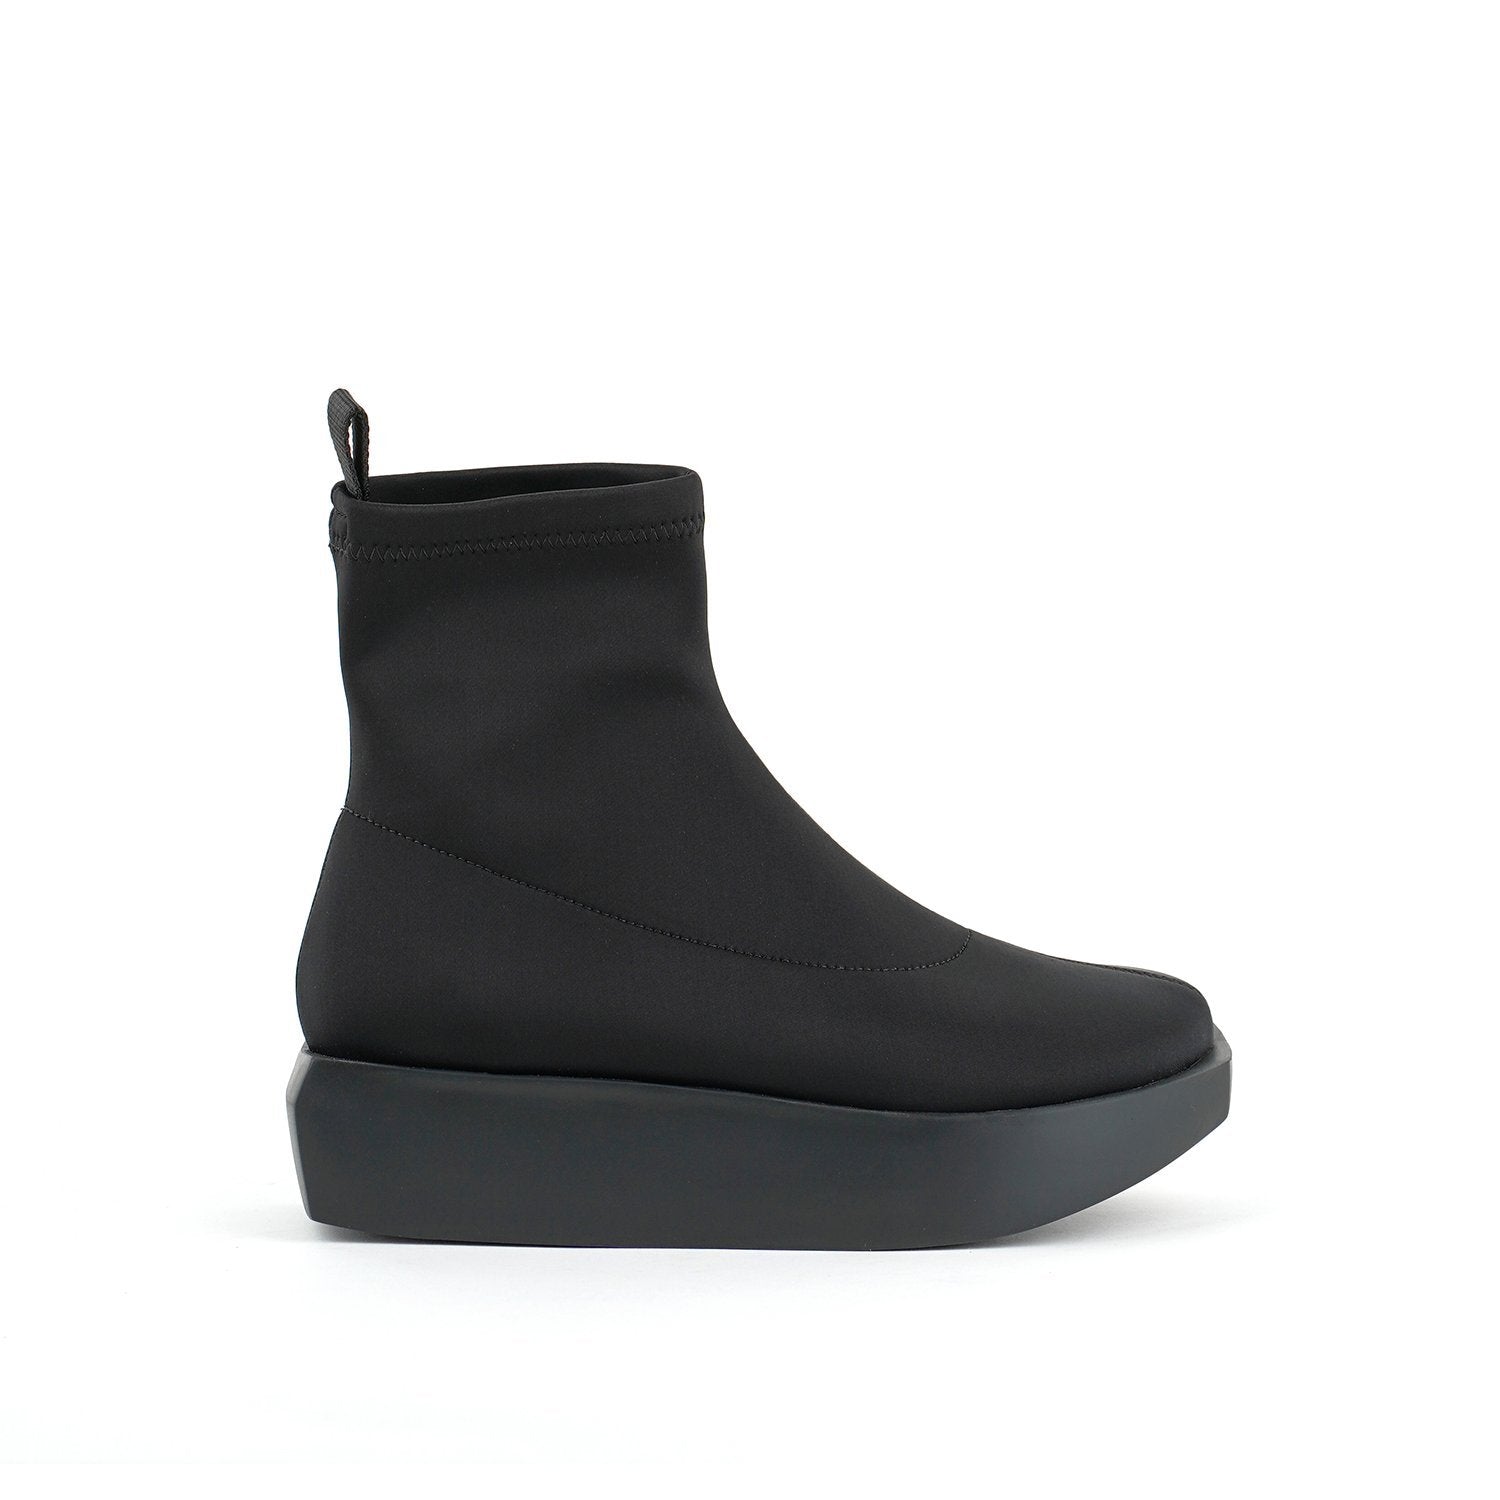 Outer side view of the united nude wa bootie lo. This bootie is black and minimal. It has a sock-like appearance with a black platform sole.